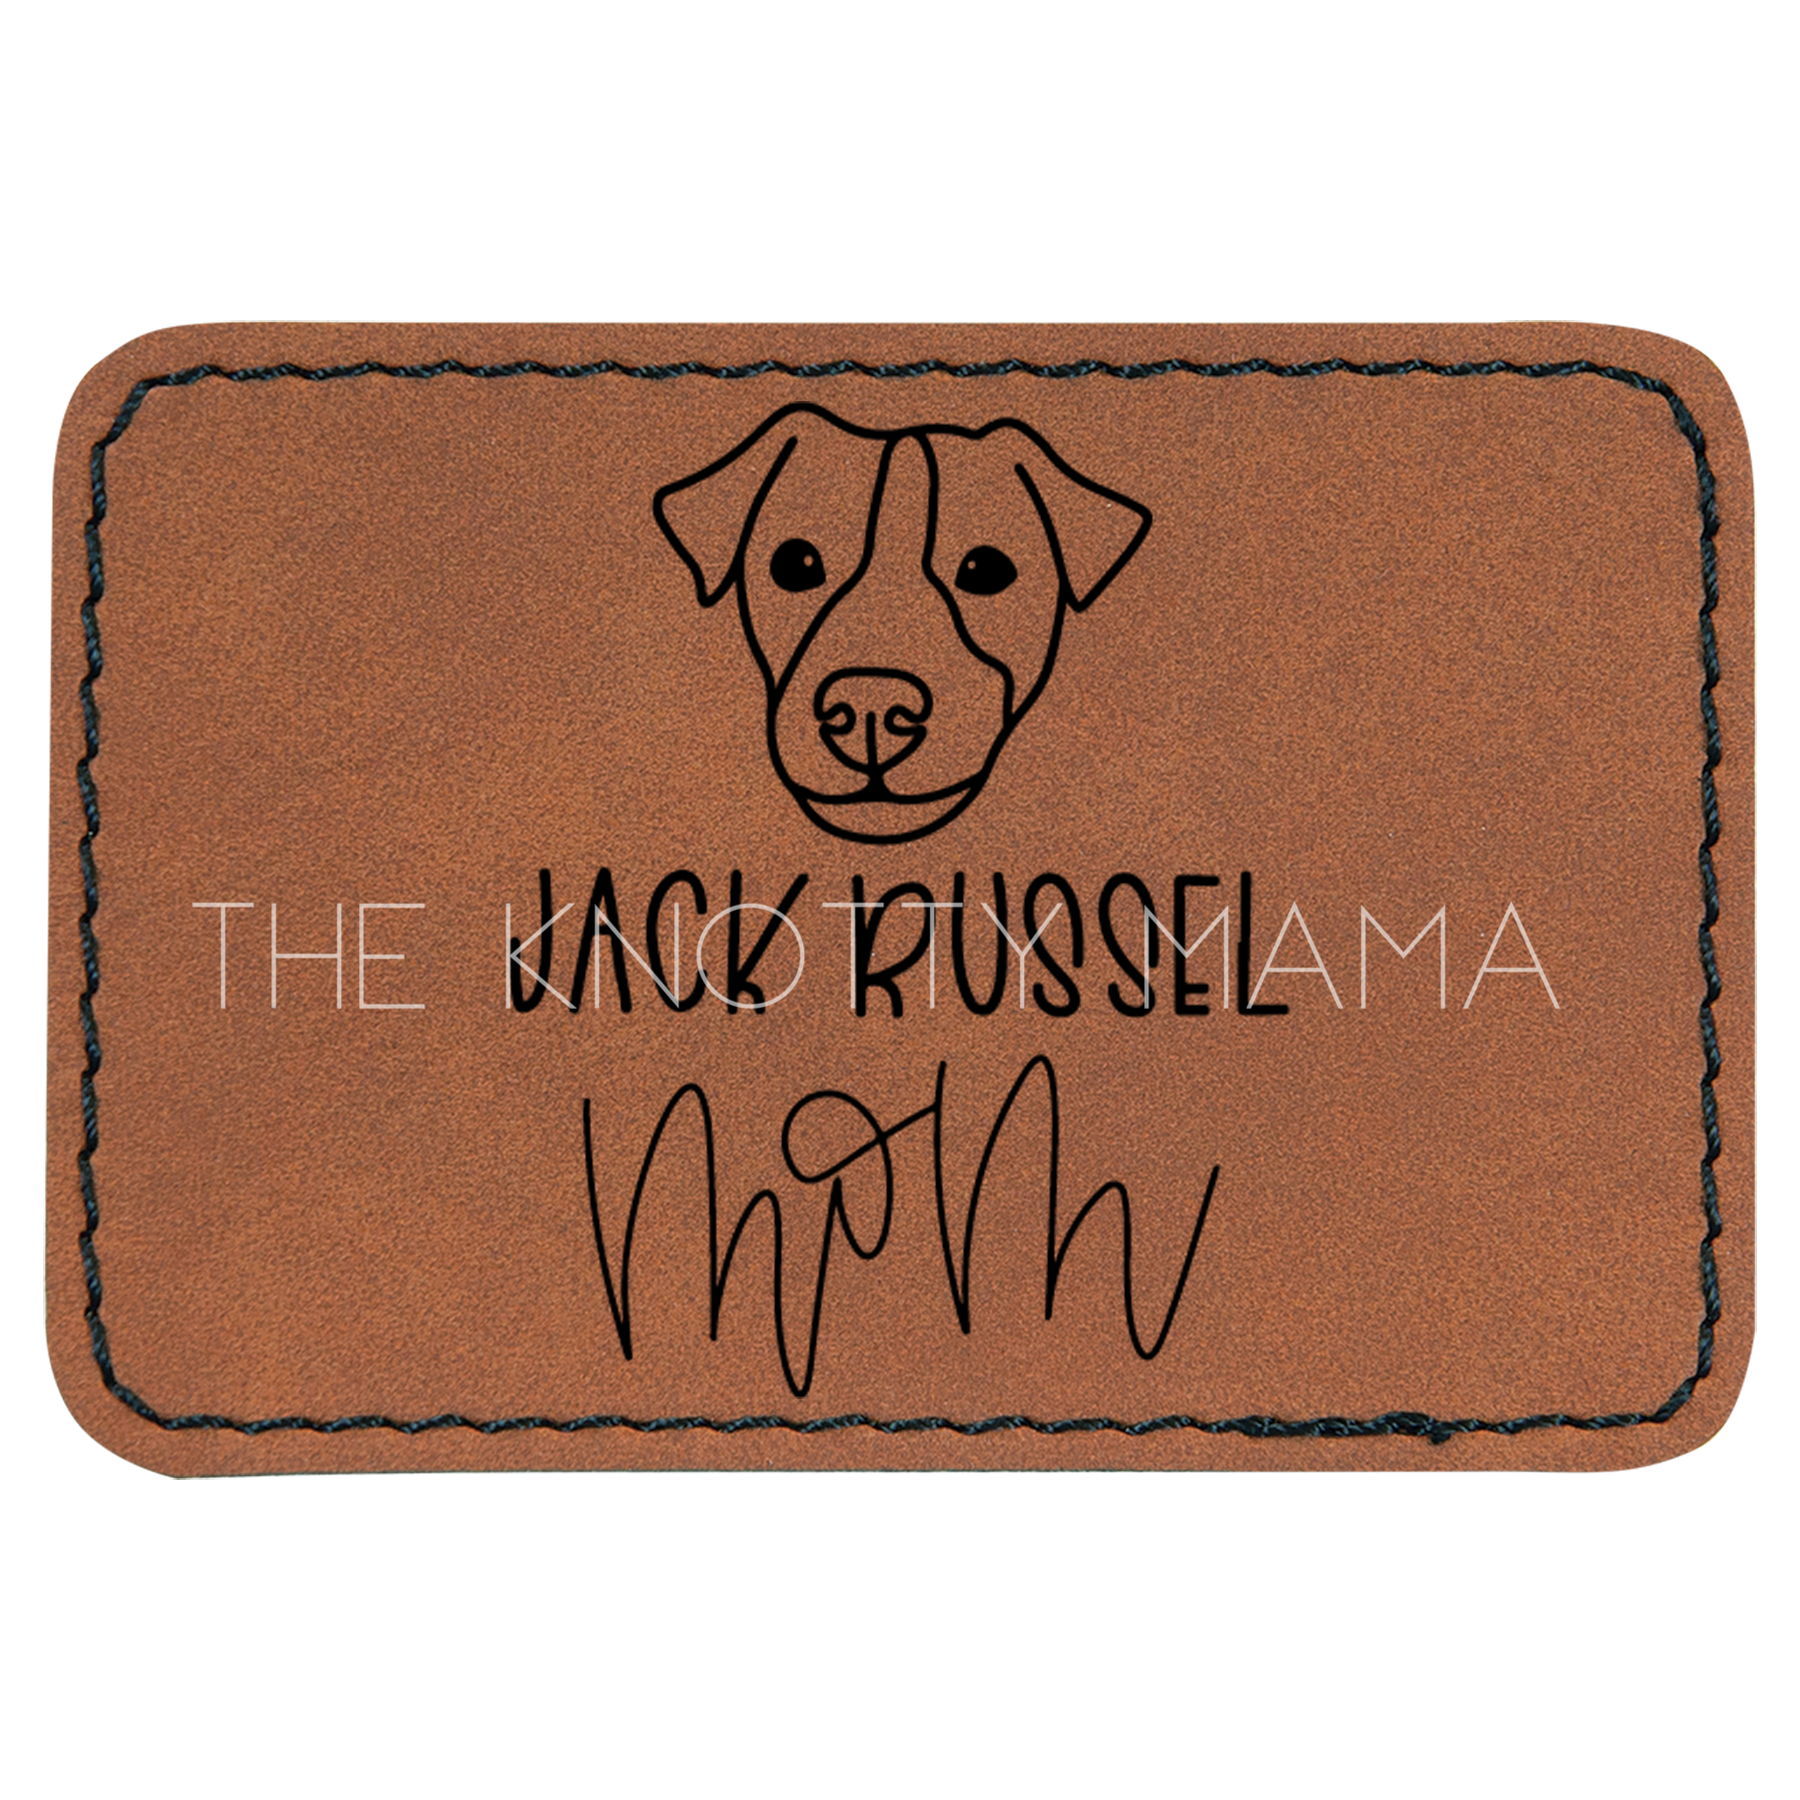 Jack Russel Mom Patch